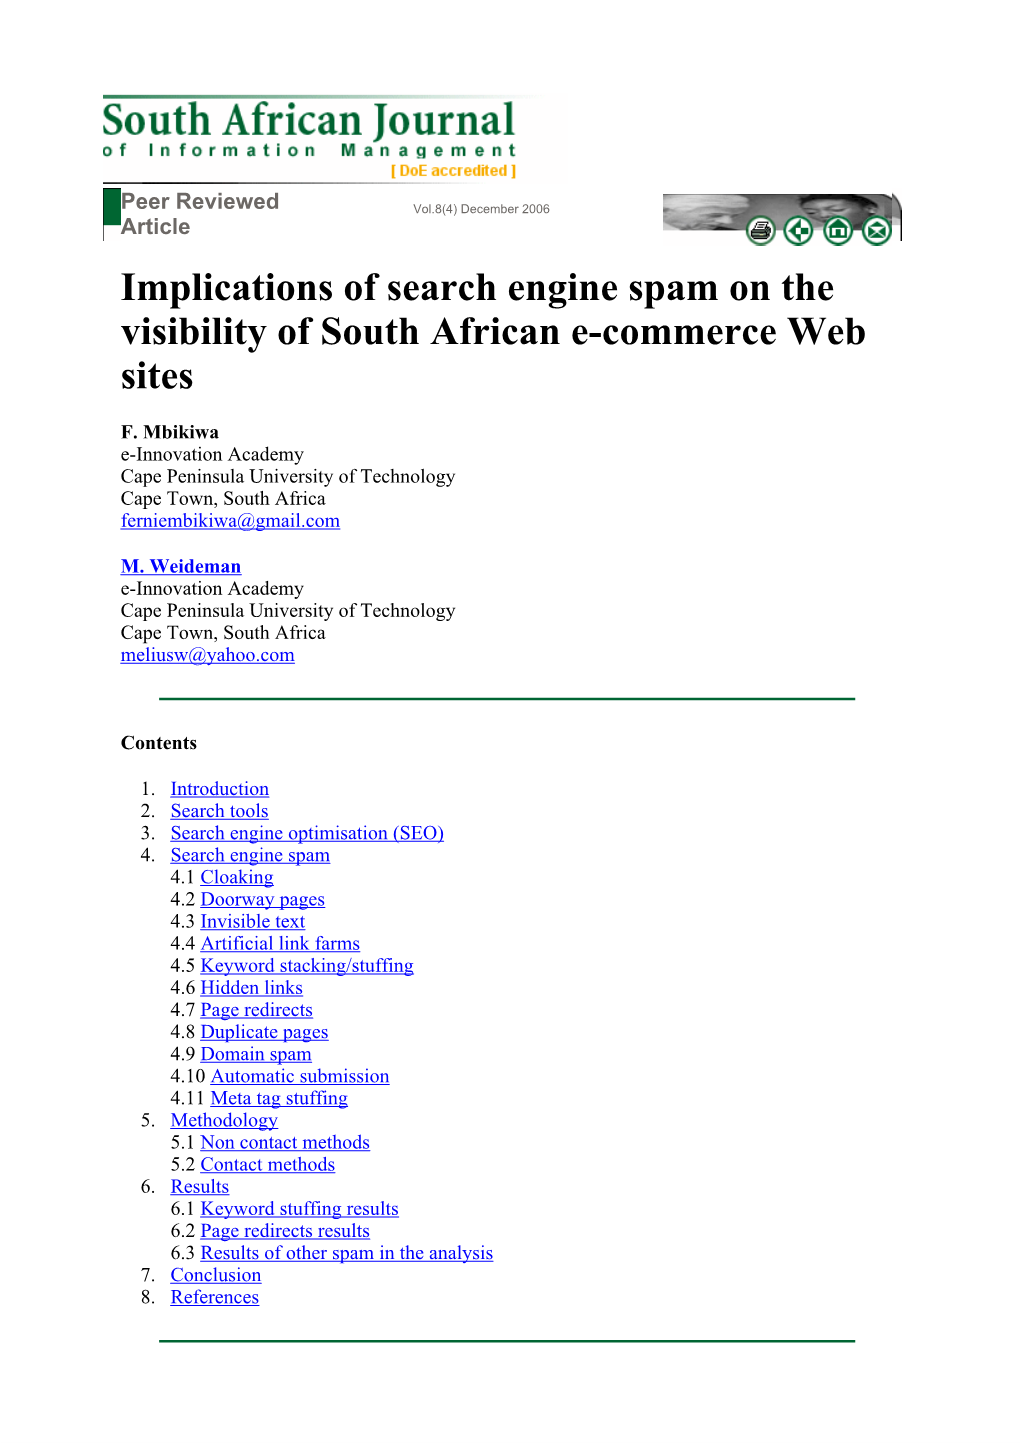 Implications of Search Engine Spam on the Visibility of South African E-Commerce Web Sites